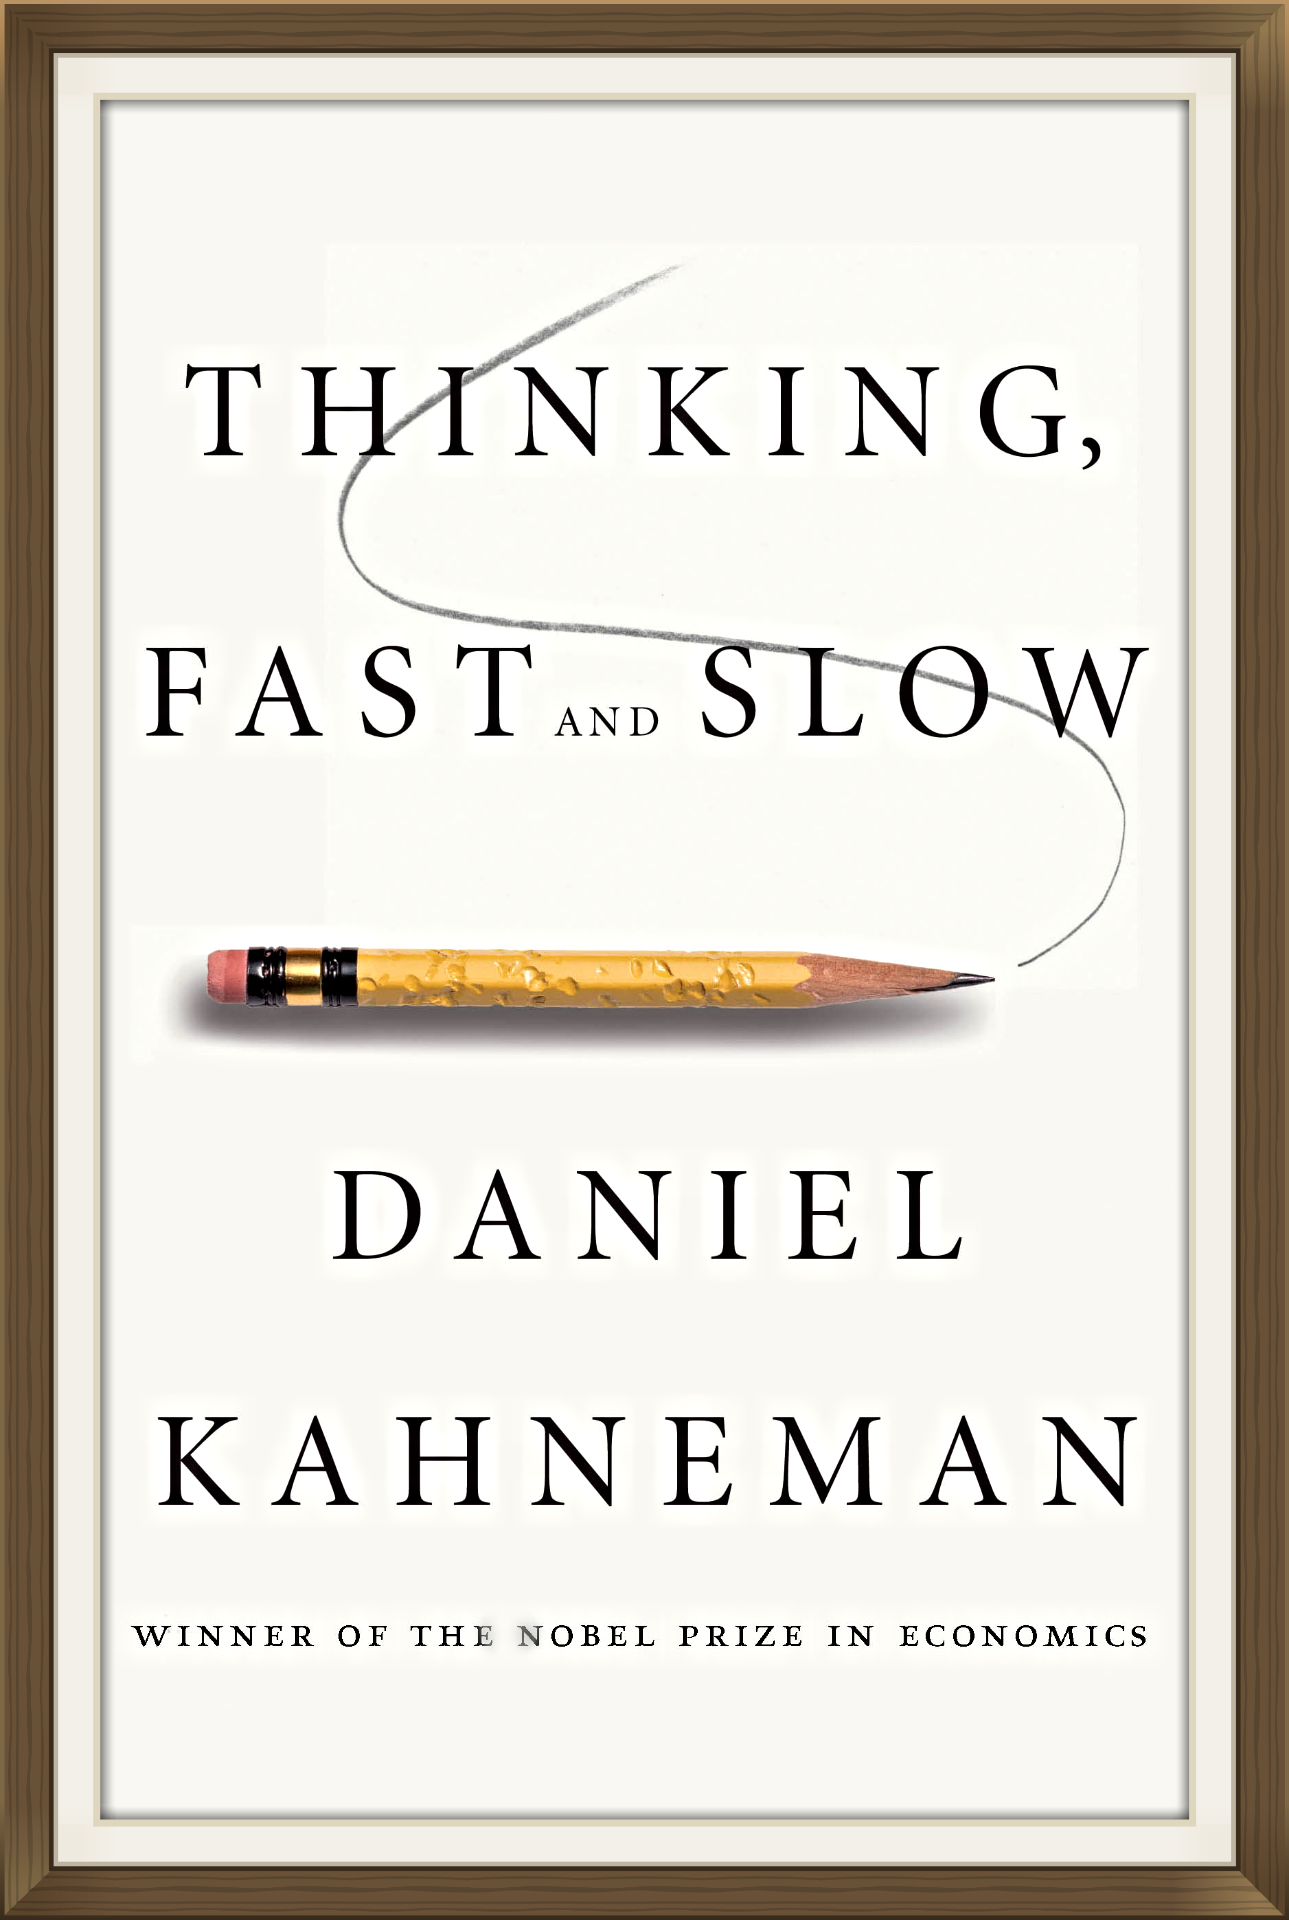 Book summary for Thinking, Fast and Slow